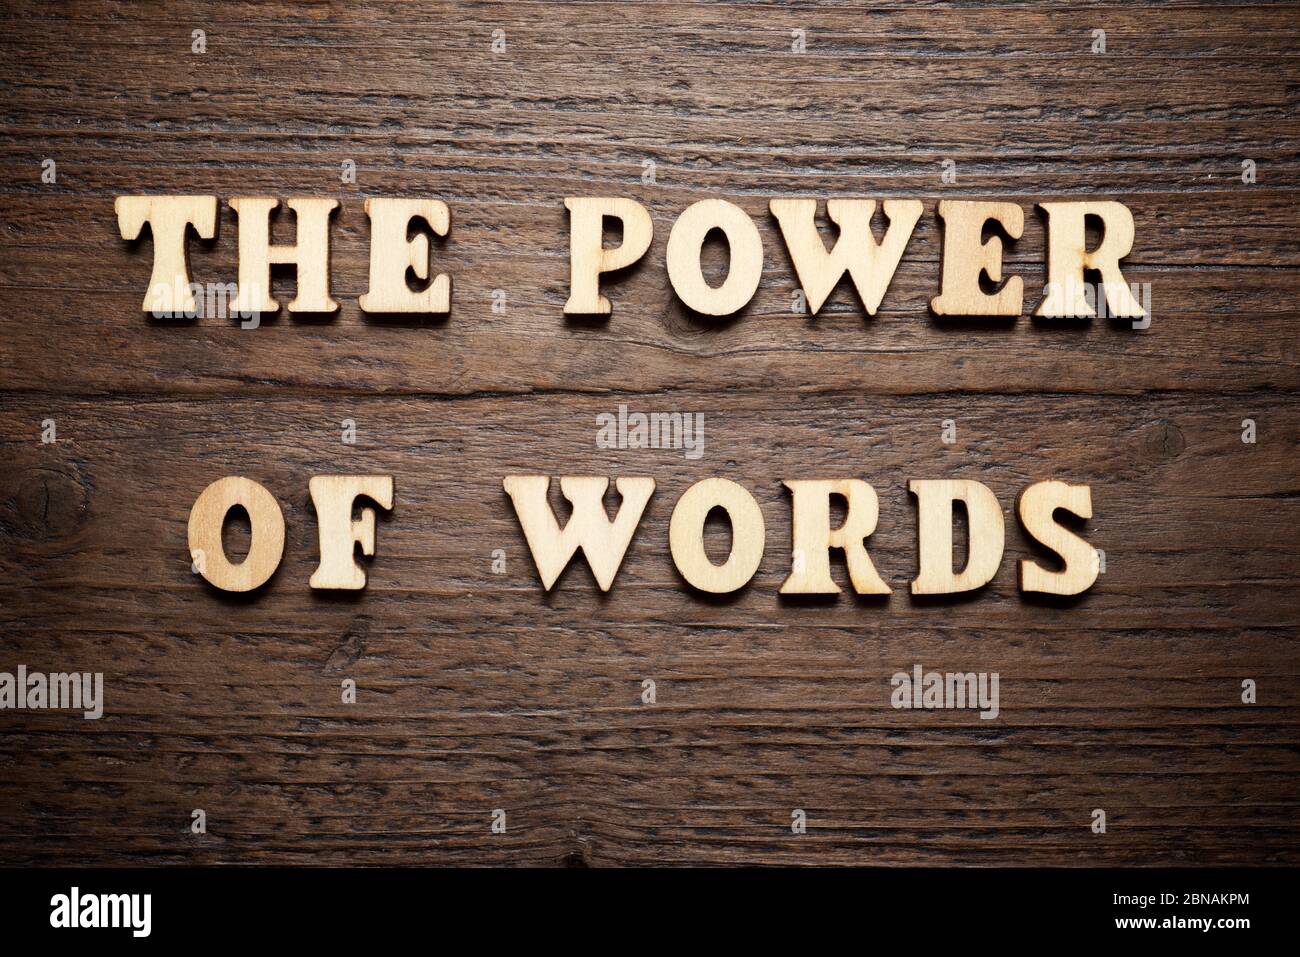 The power of words text on a wood table. Stock Photo